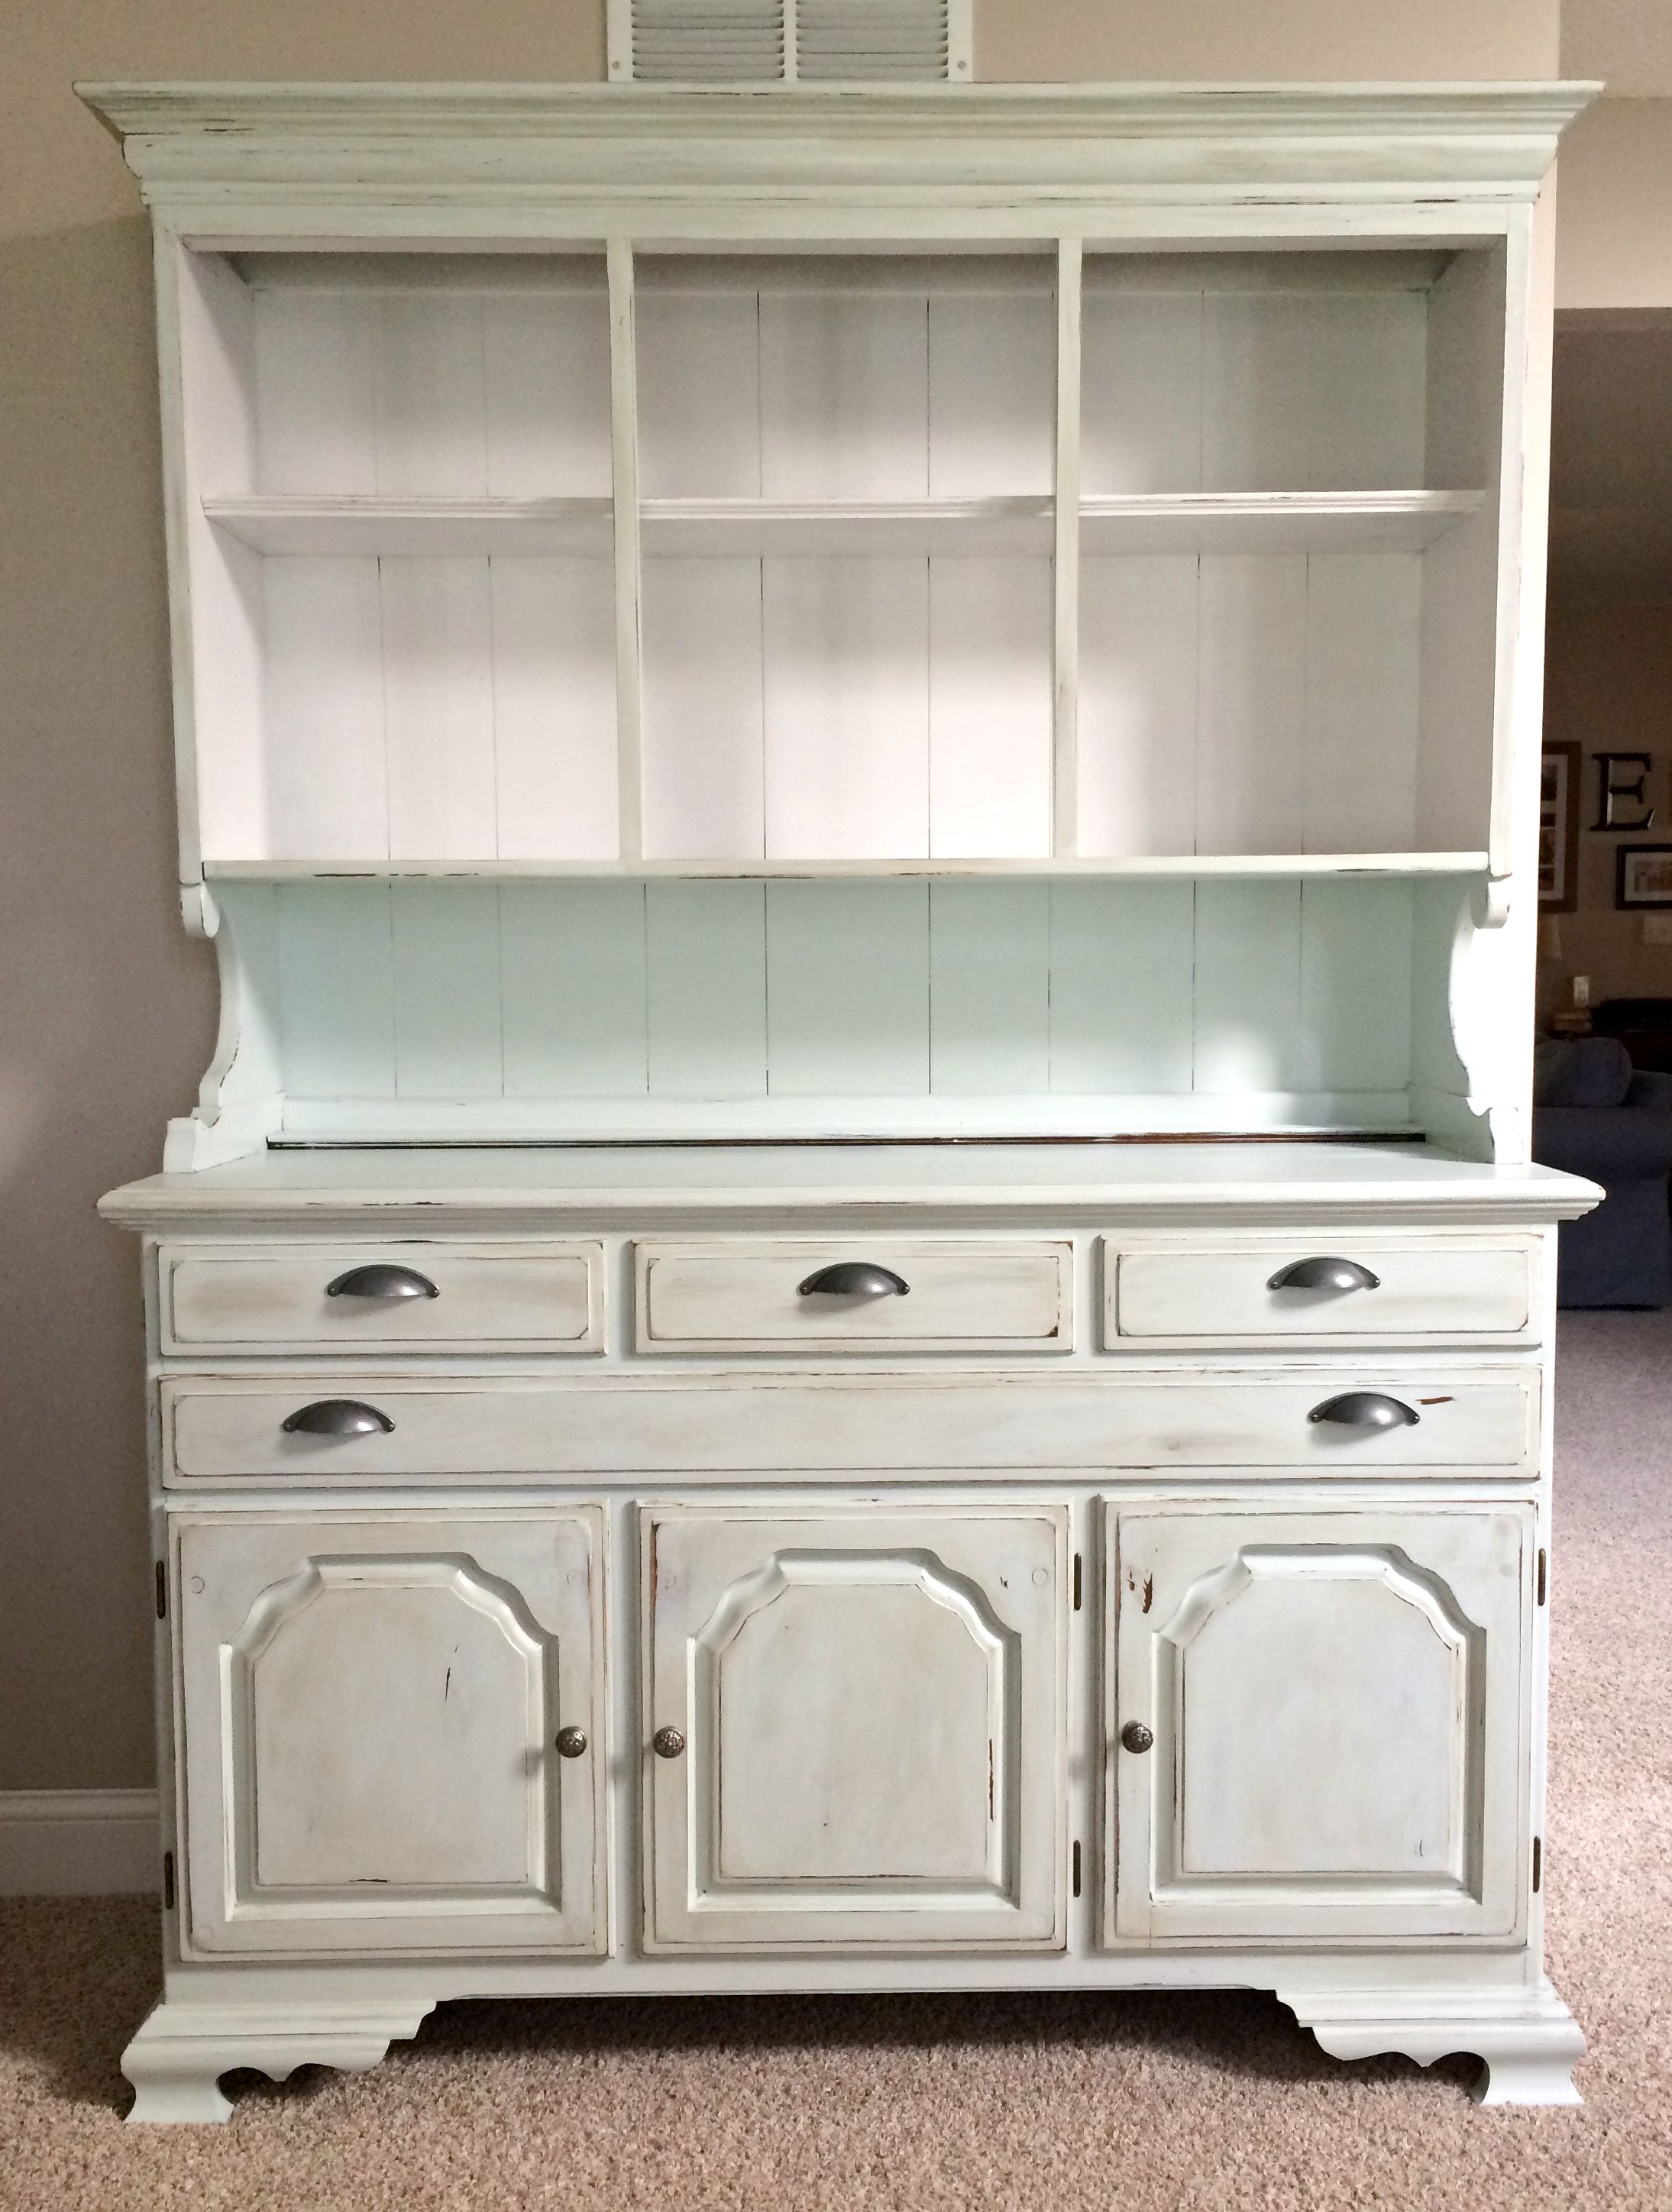 How To Paint And Distress A Wood Hutch Final Painted